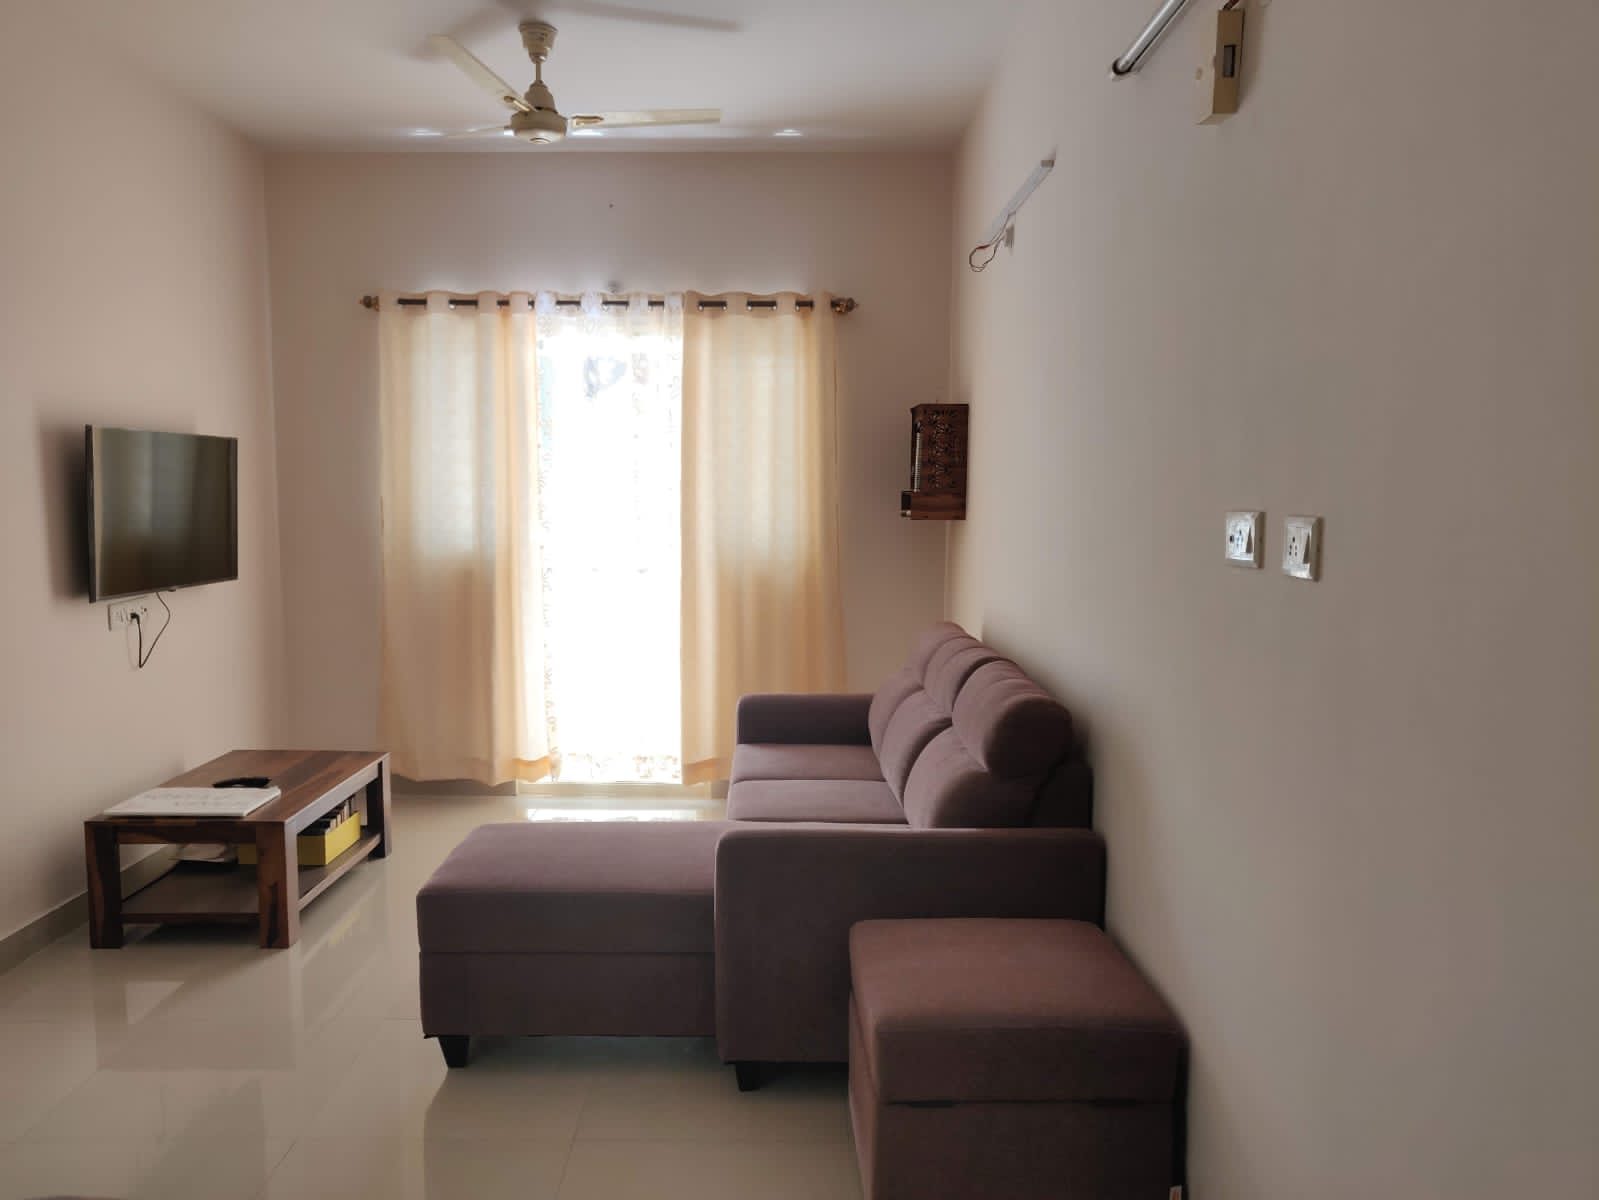 2 BHK Residential Apartment for Lease Only at JAML2 - 3670-27lakh in Nagavarpalya